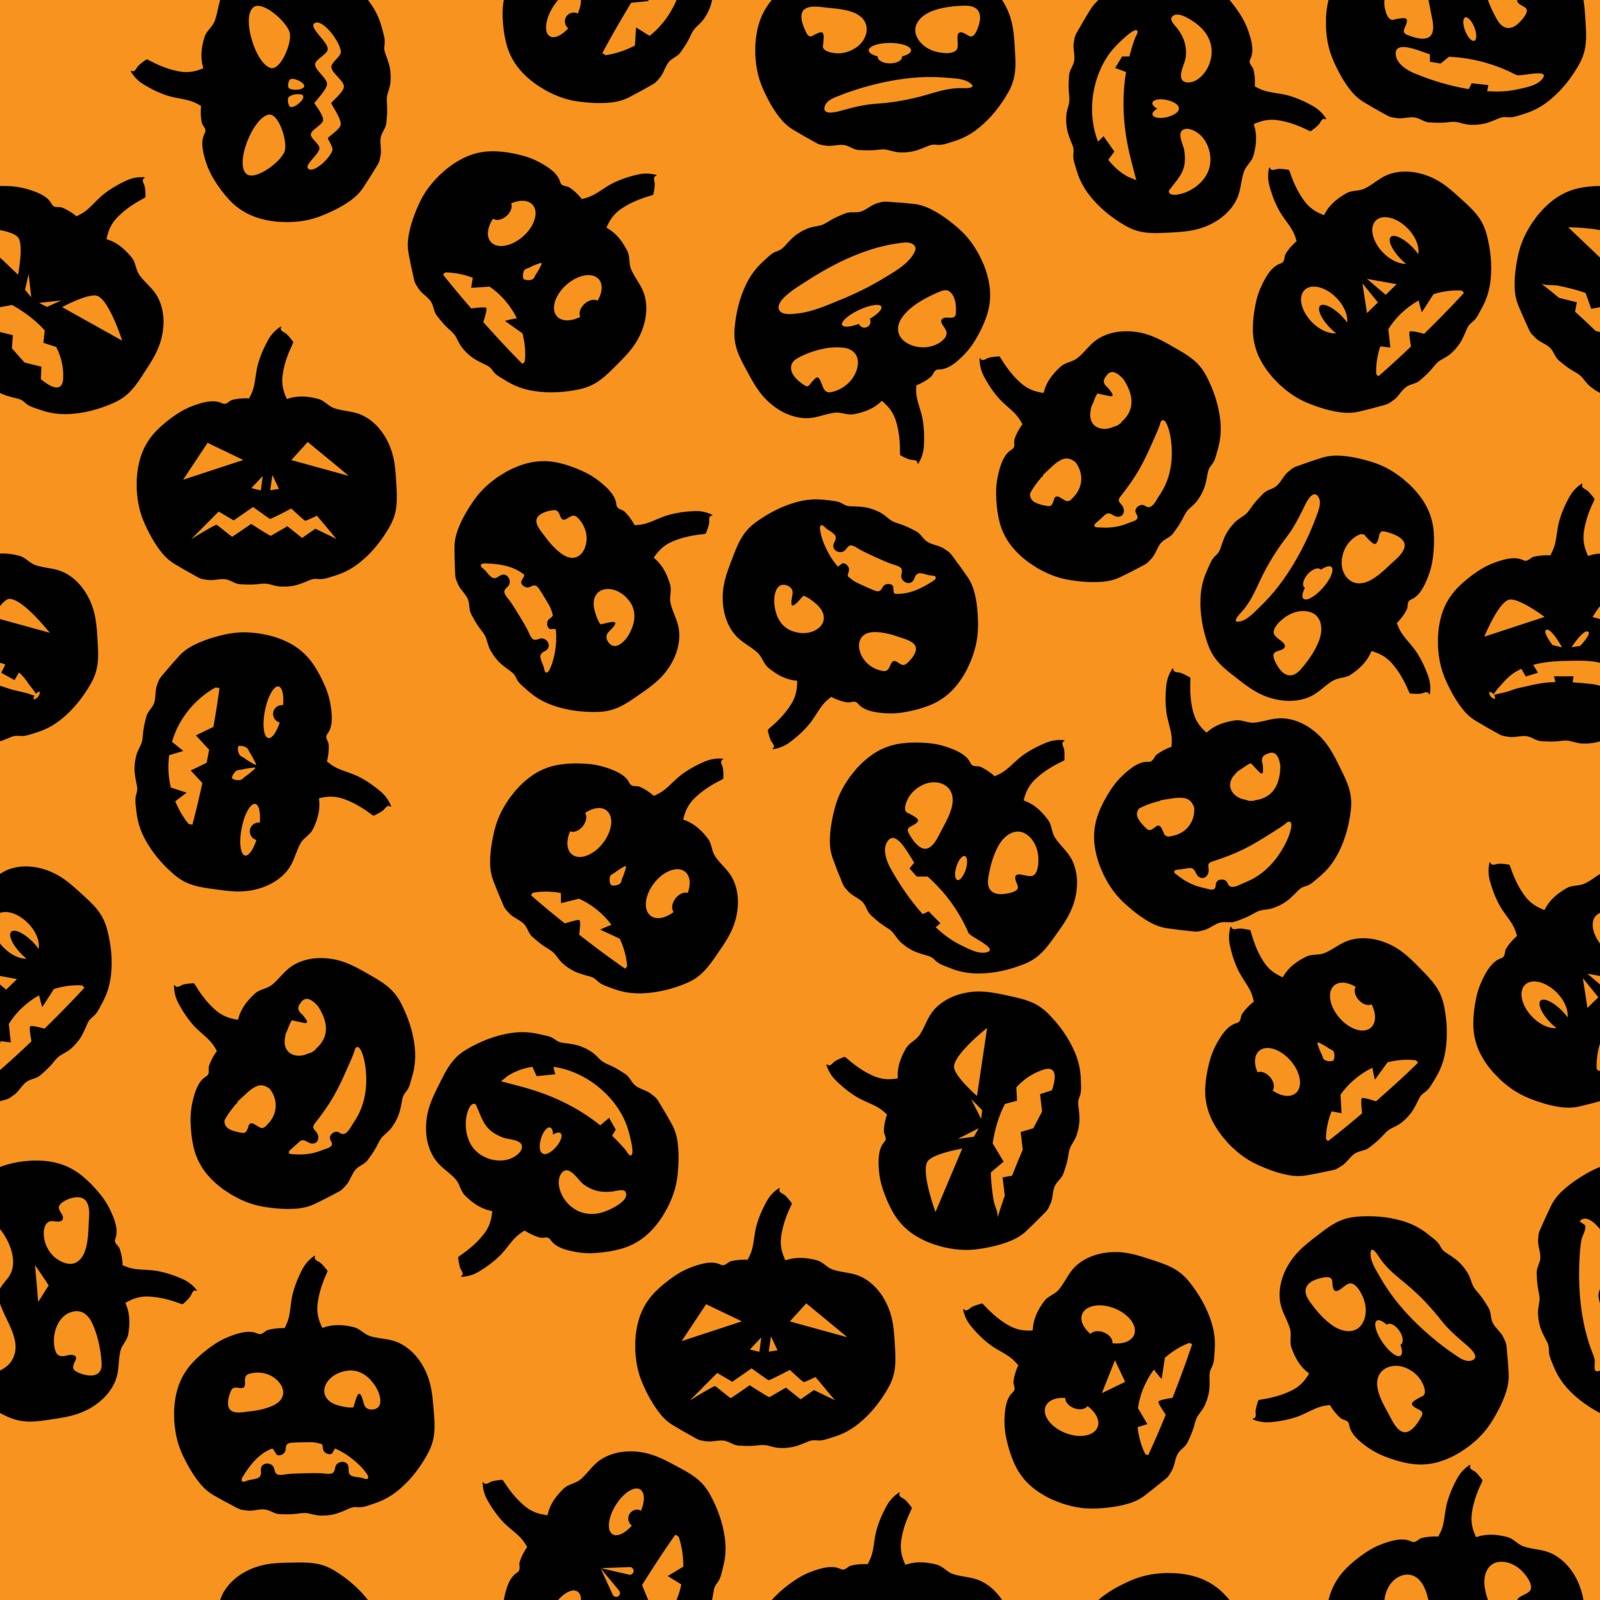 Seamless orange Halloween background with black pumpkin silhouettes. Suitable for textile, packaging, paper printing, simple backgrounds and texture.